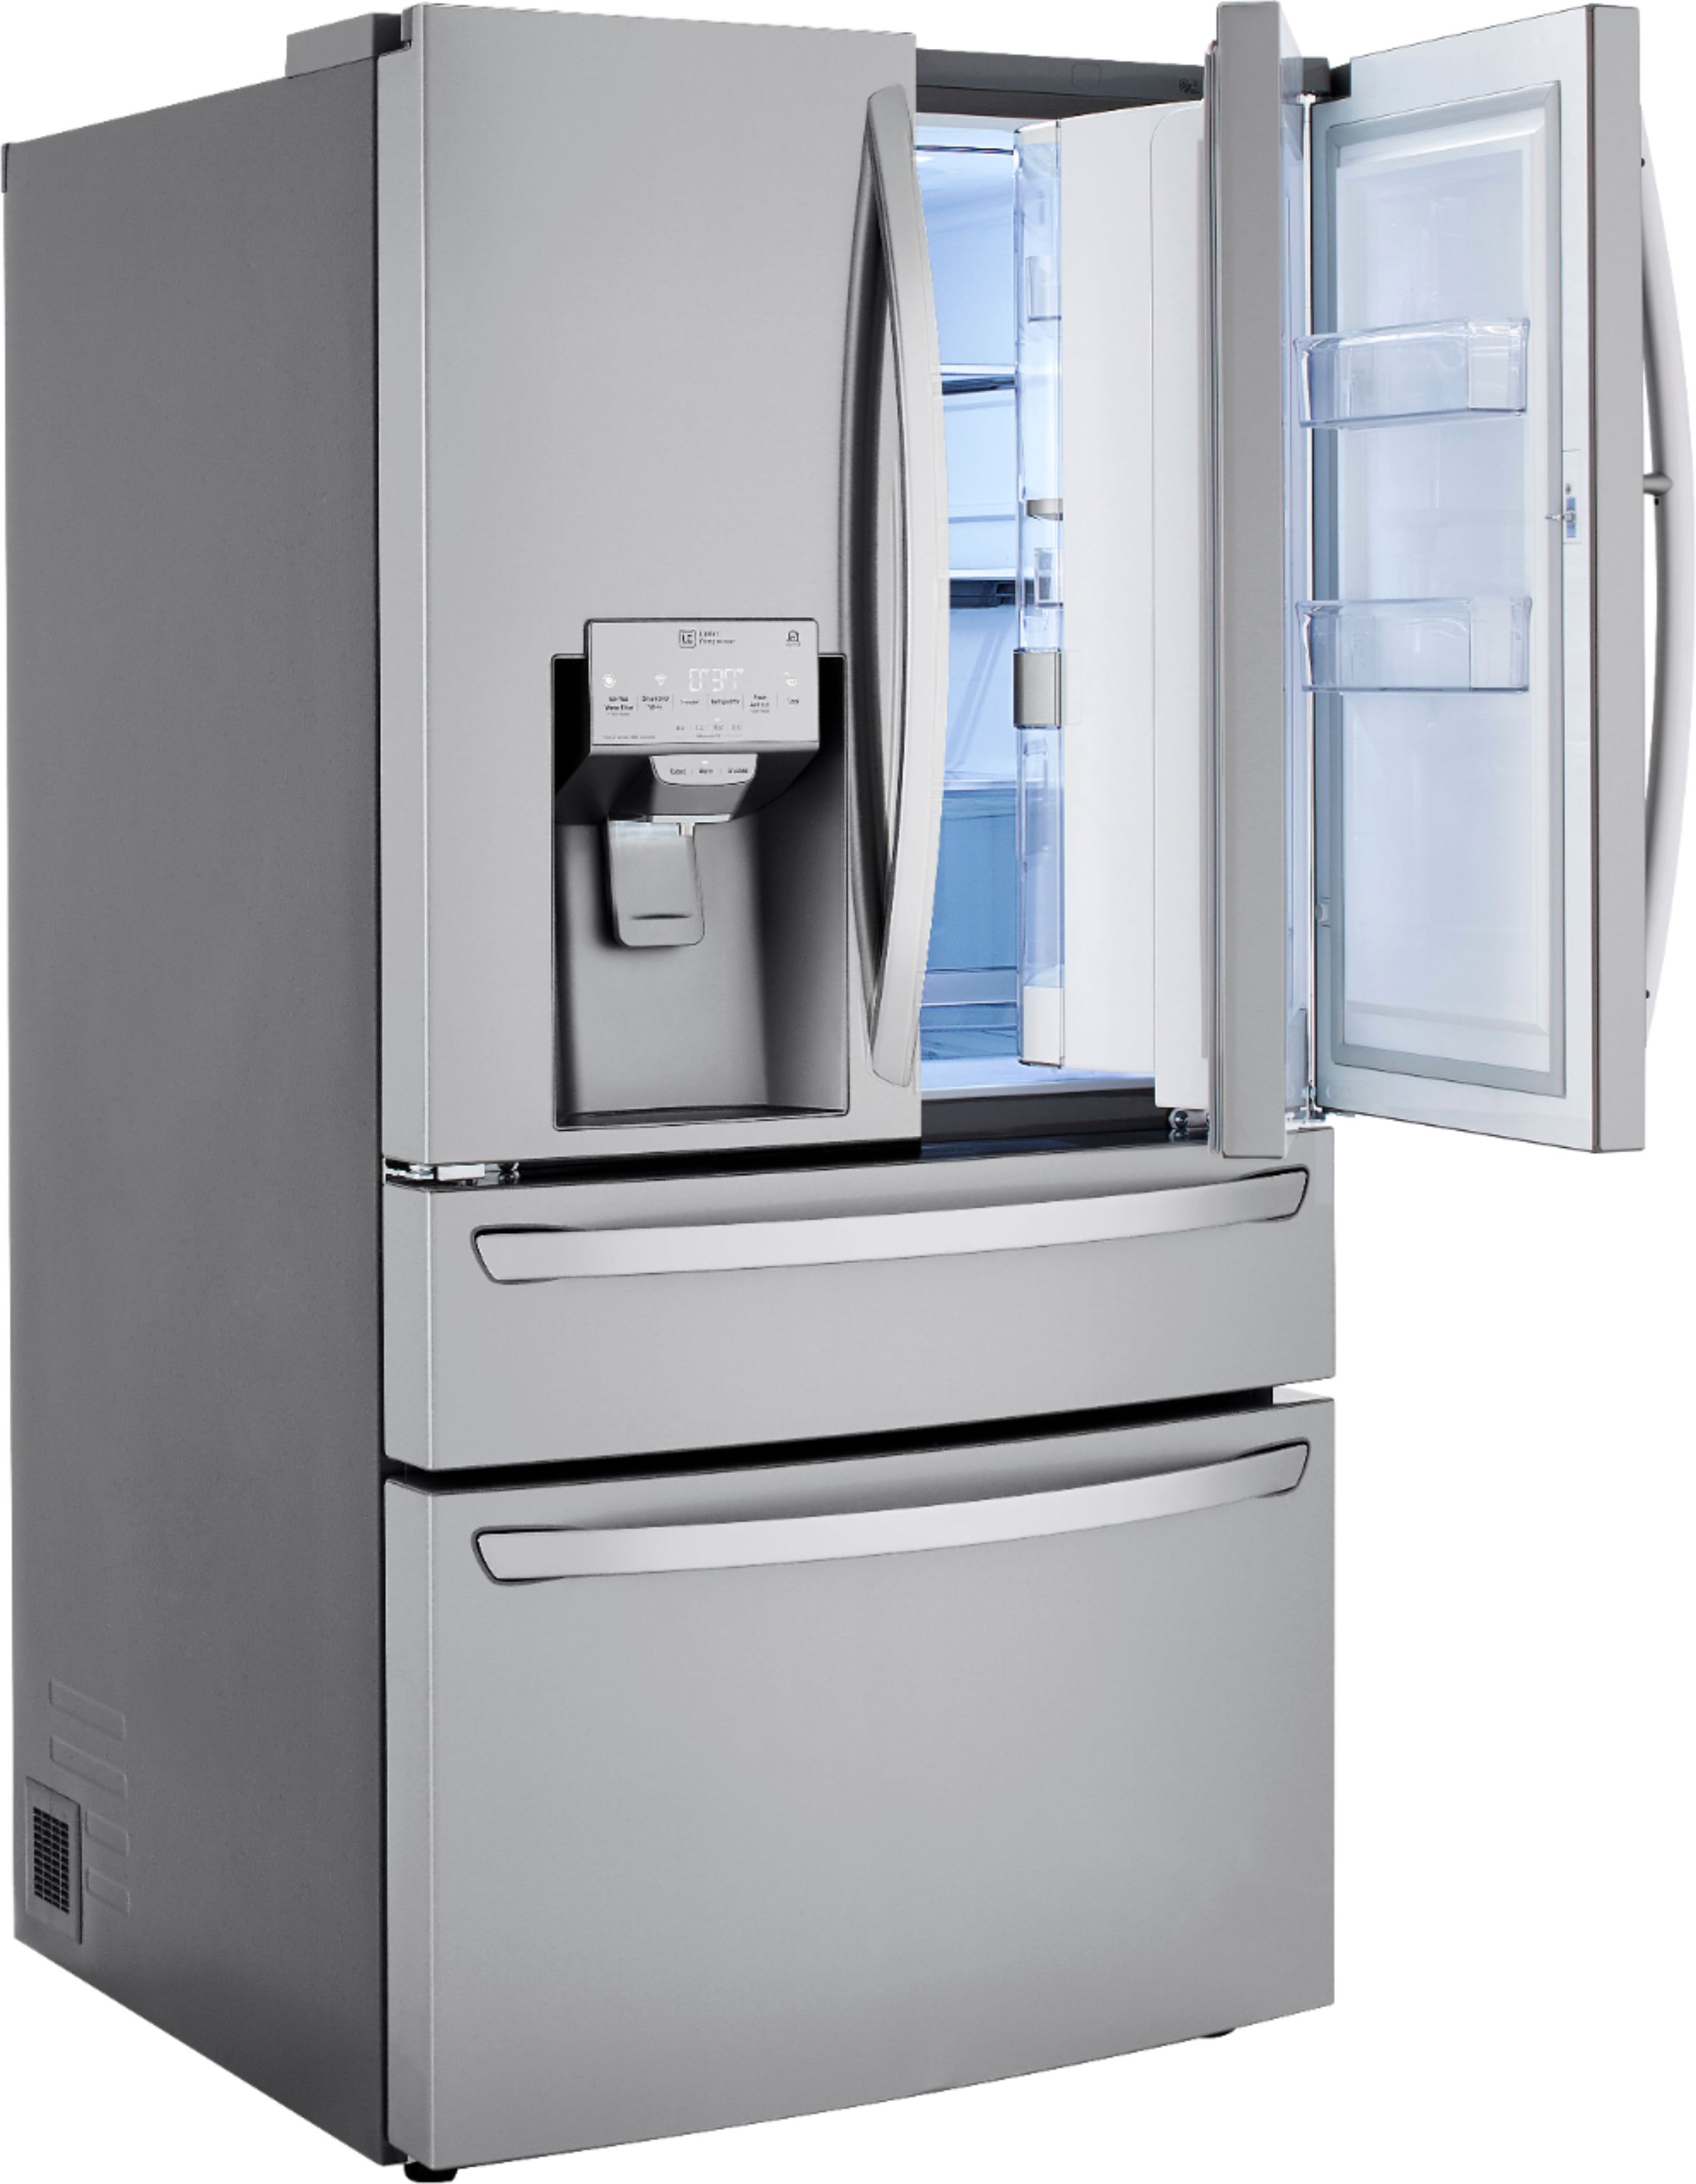 LG 'Rolls' Out Craft Ice On More Refrigerator Models, Adds New